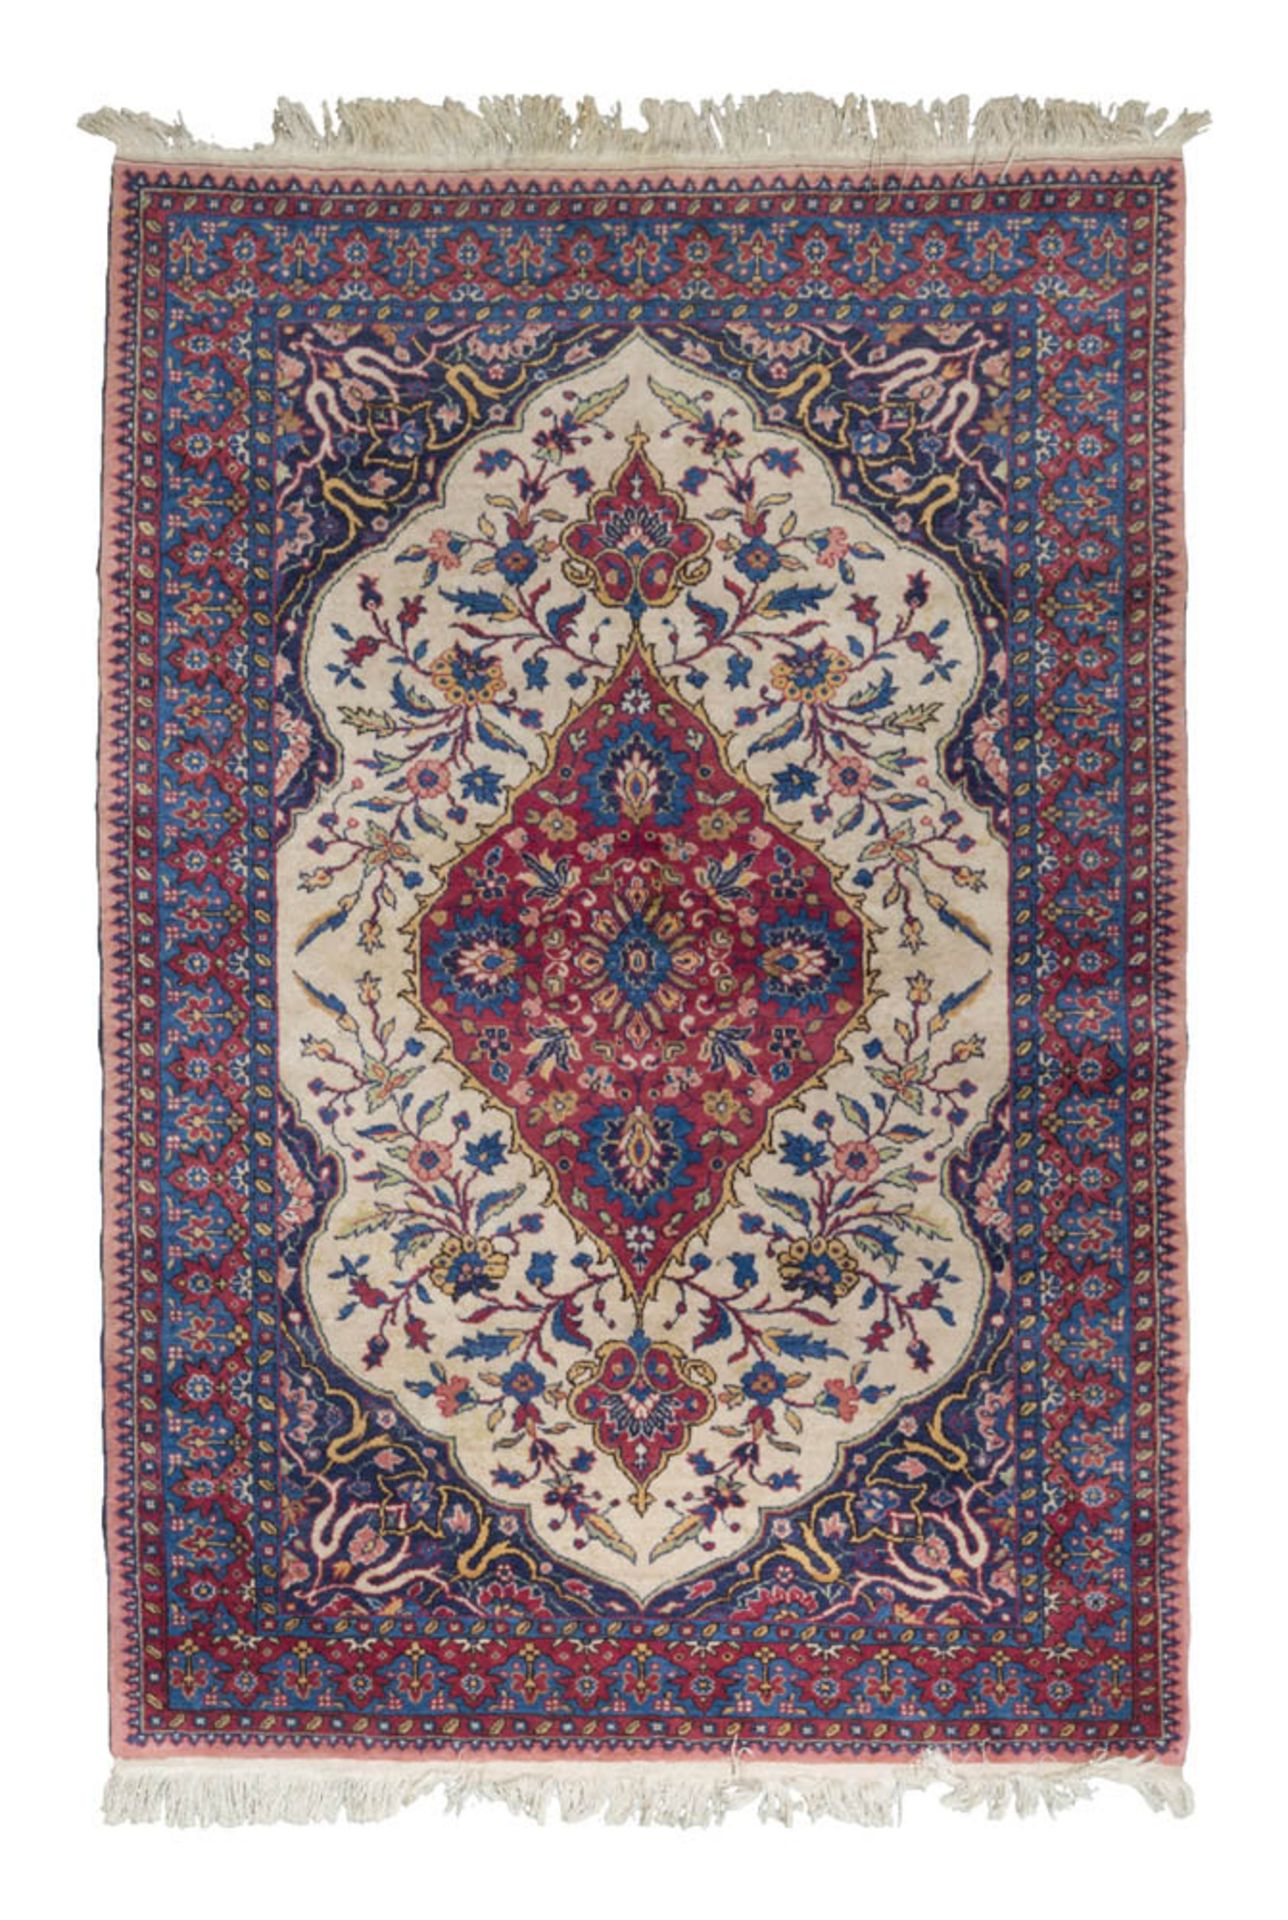 Indian Sour carpet, early 20th century. Measures cm. 180 x 120.TAPPETO INDIANO AGRA, INIZI XX SECOLO